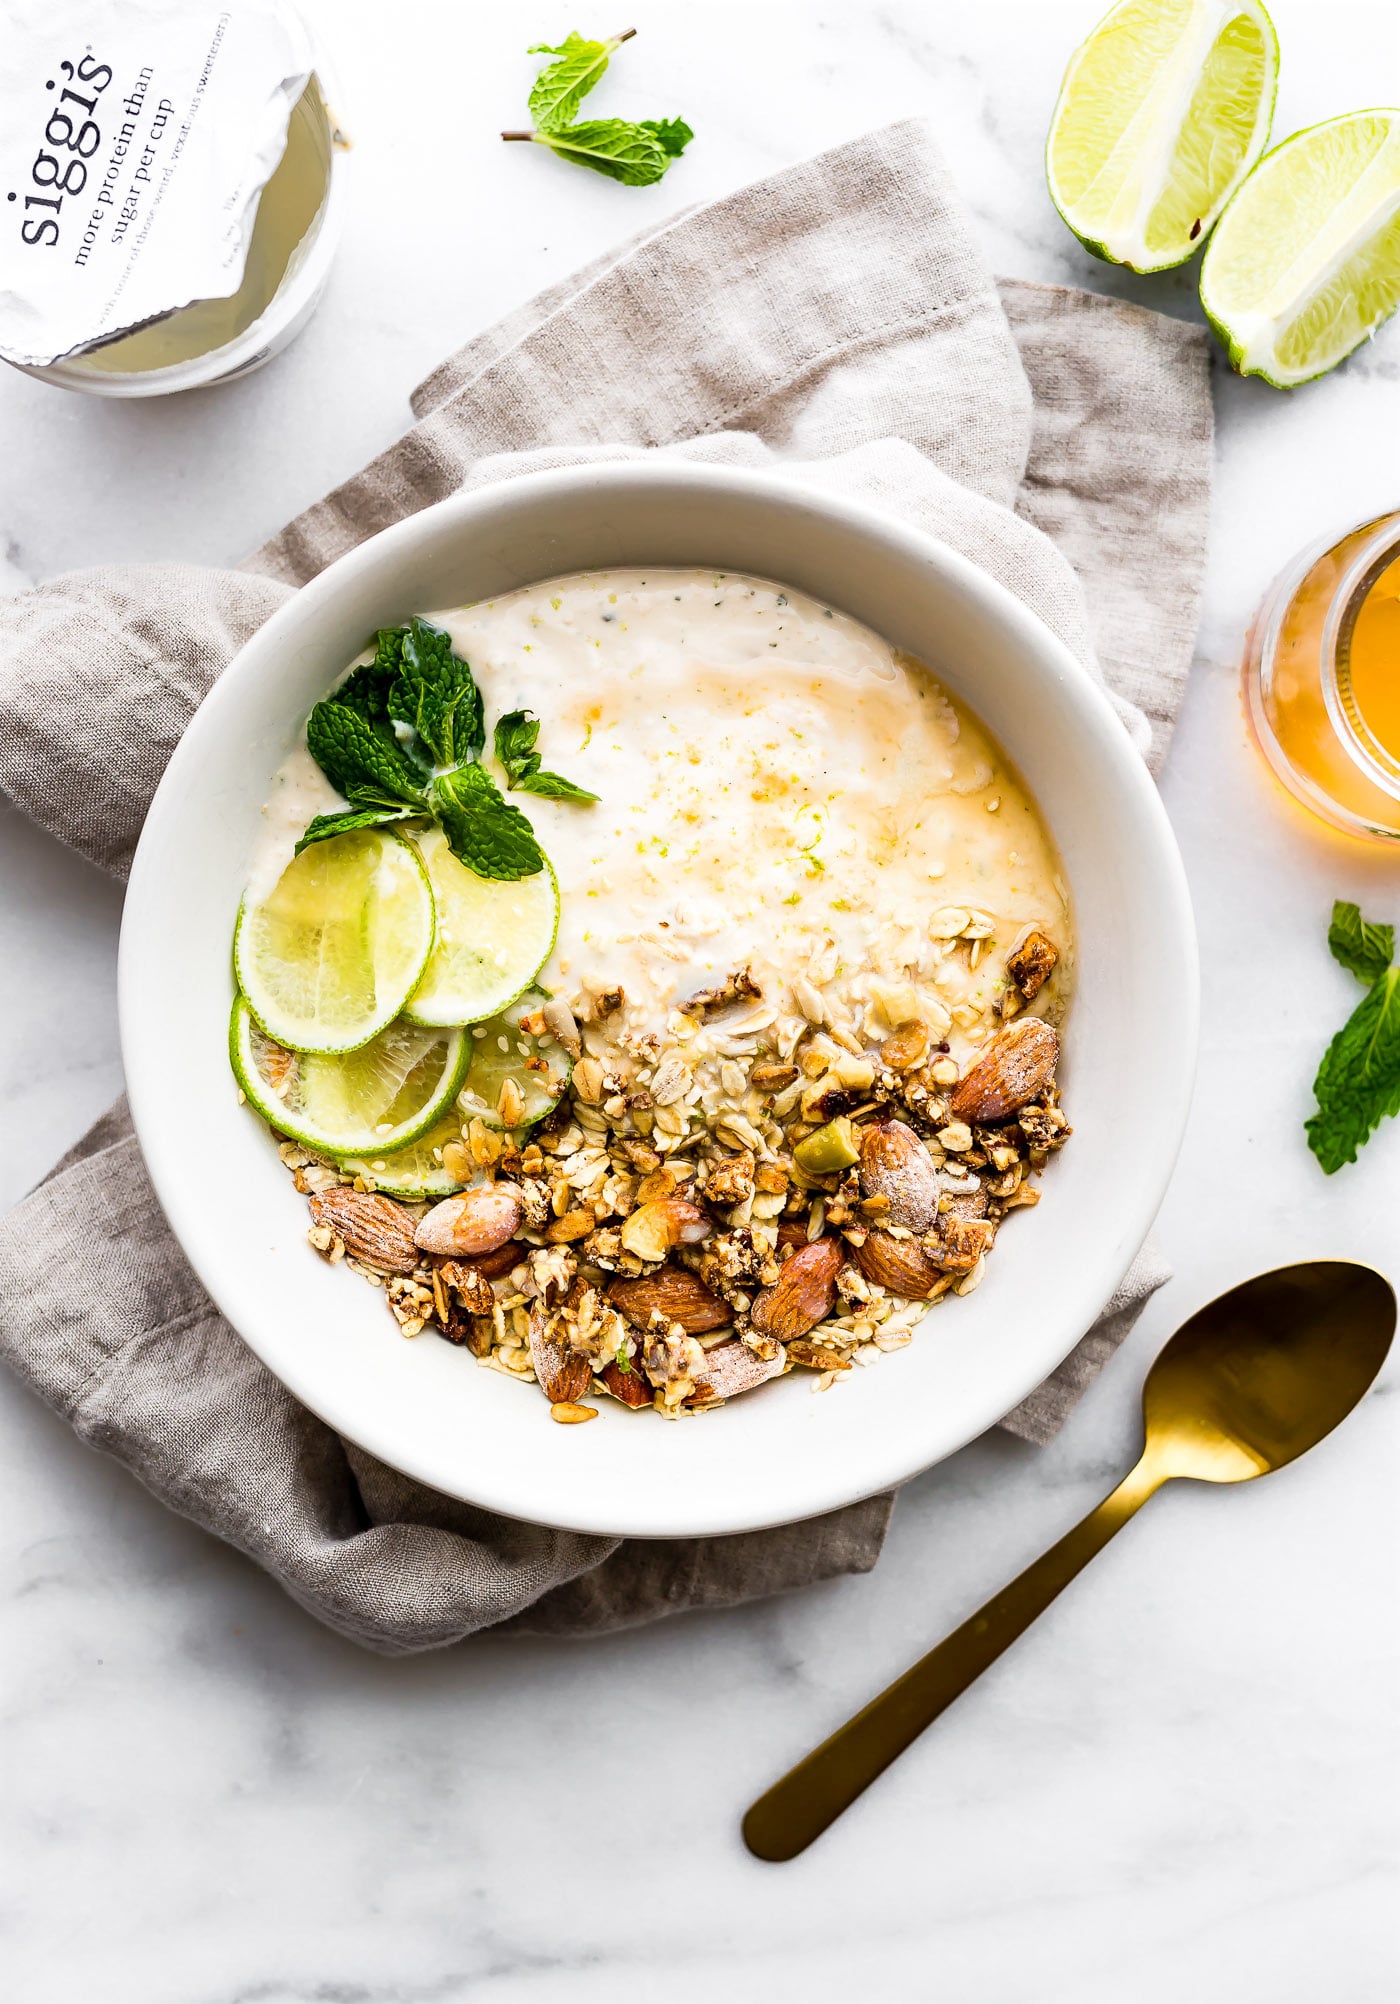 : This Zesty Tropical Yogurt Overnight Muesli recipe is the perfect make ahead breakfast bowl! Gluten- free, nutrient rich, and made with siggi's yogurt for a protein boost! #Partnering with @siggisdairy!